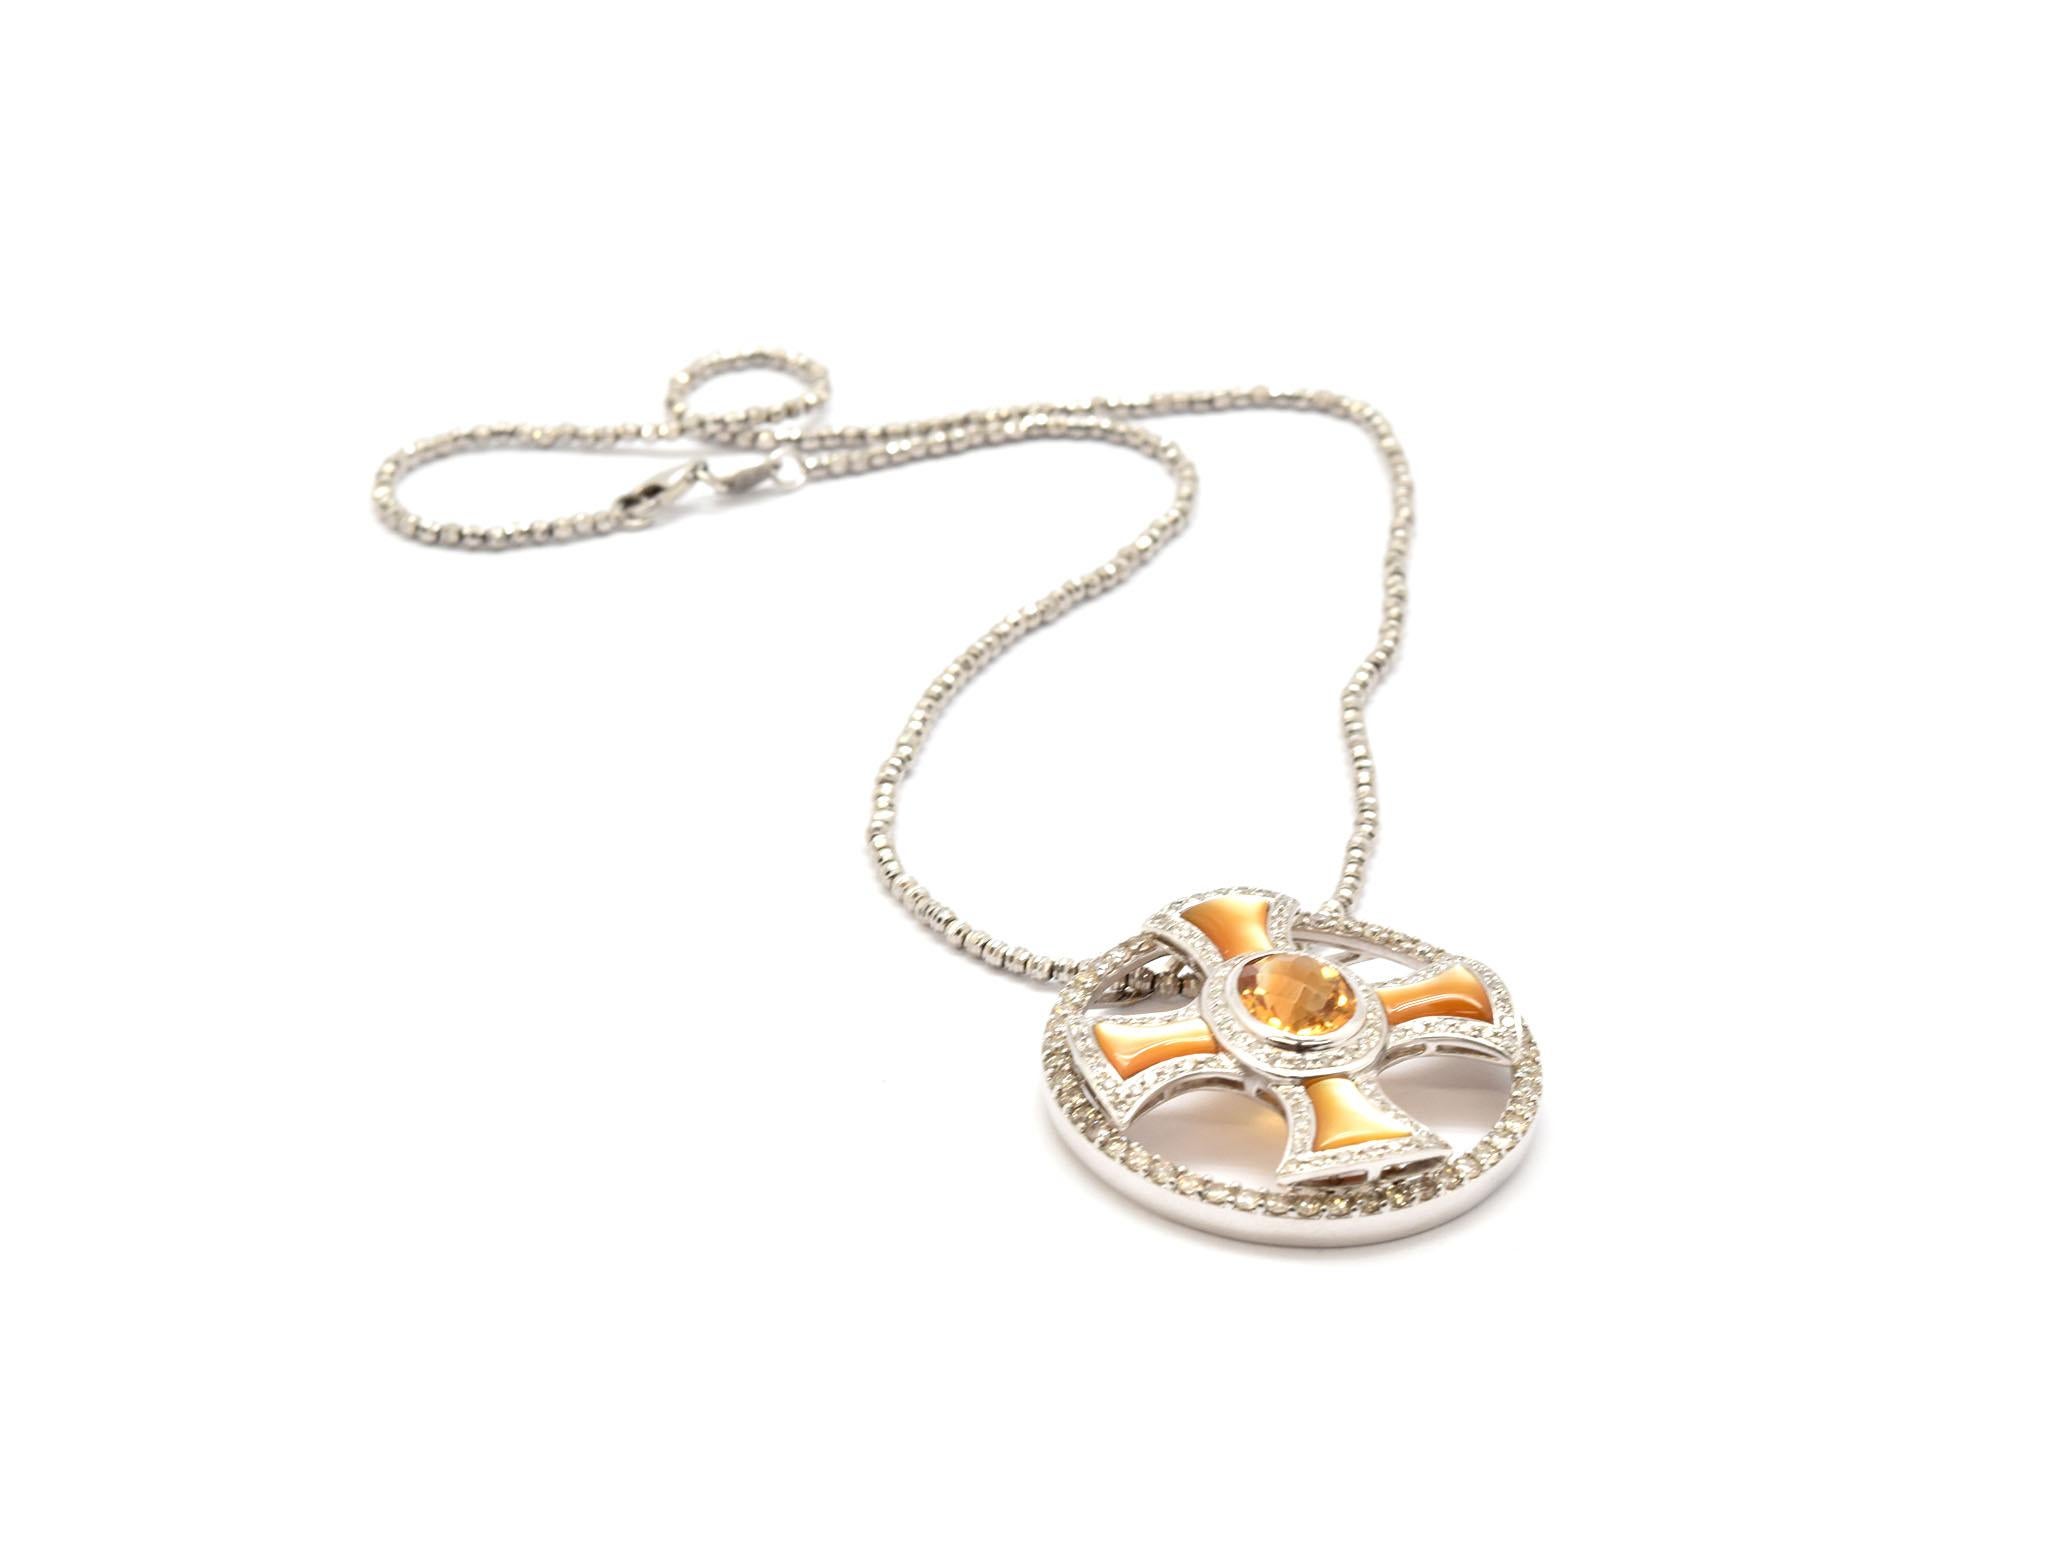 Contemporary and chic! This unique necklace has a gorgeous orange citrine stone at its center. The citrine measures 8x10mm. Stemming for the citrine are 4 bars of orange mother of pearl. The citrine and mother of pearl are all surrounded by gorgeous